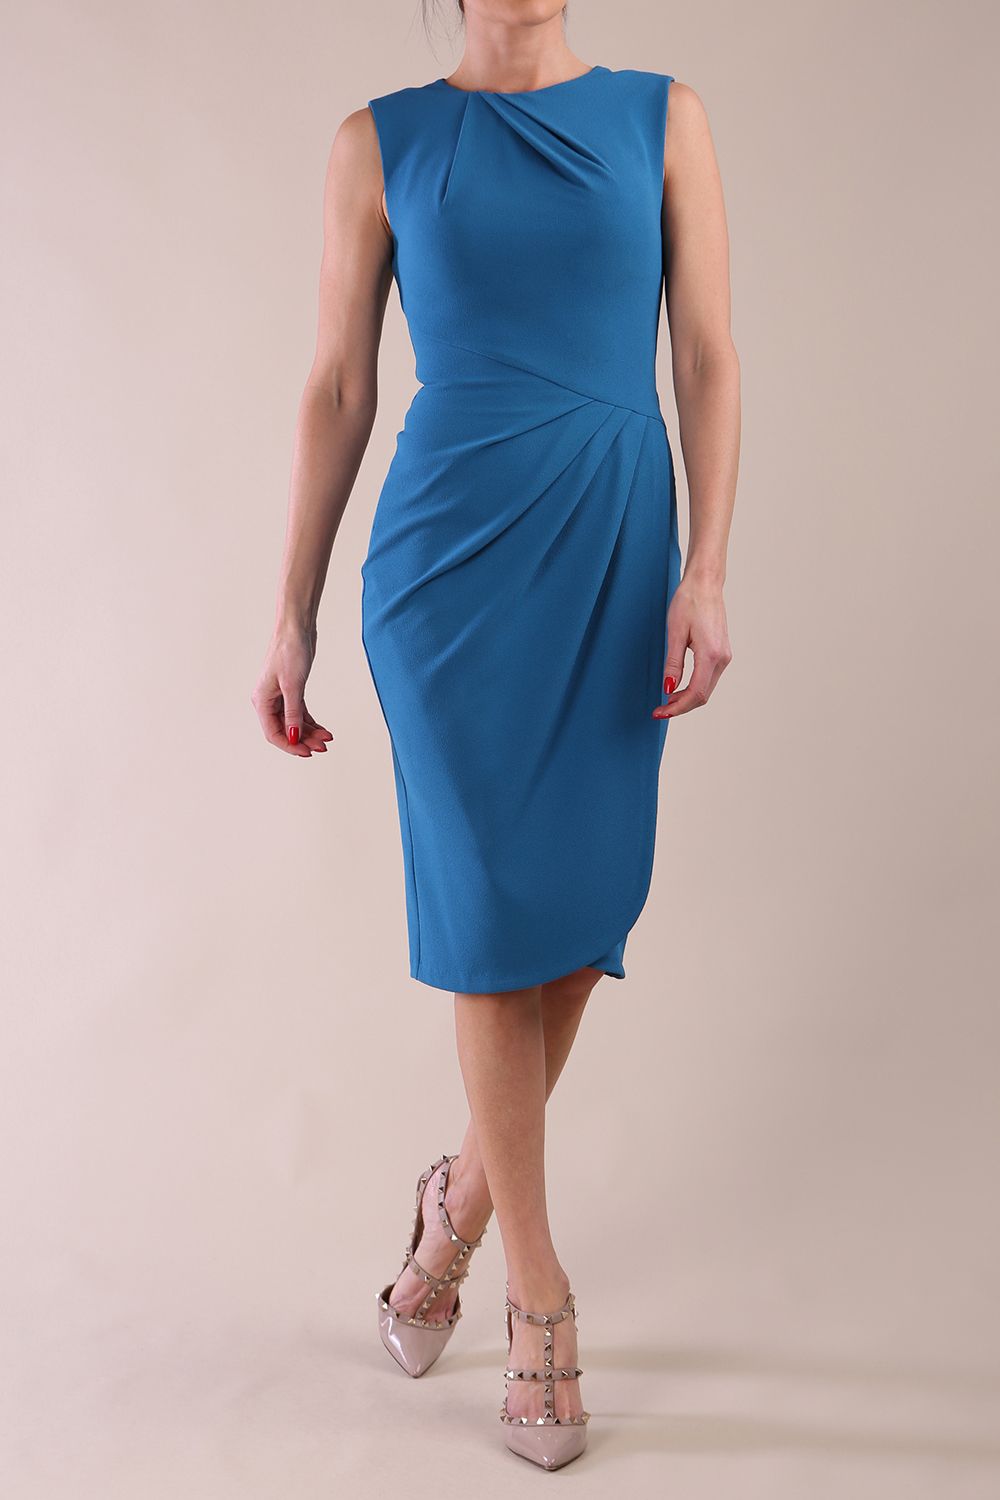 Model wearing diva catwalk Biscay Sleeveless Pleating pencil skirt dress in Tropical Teal